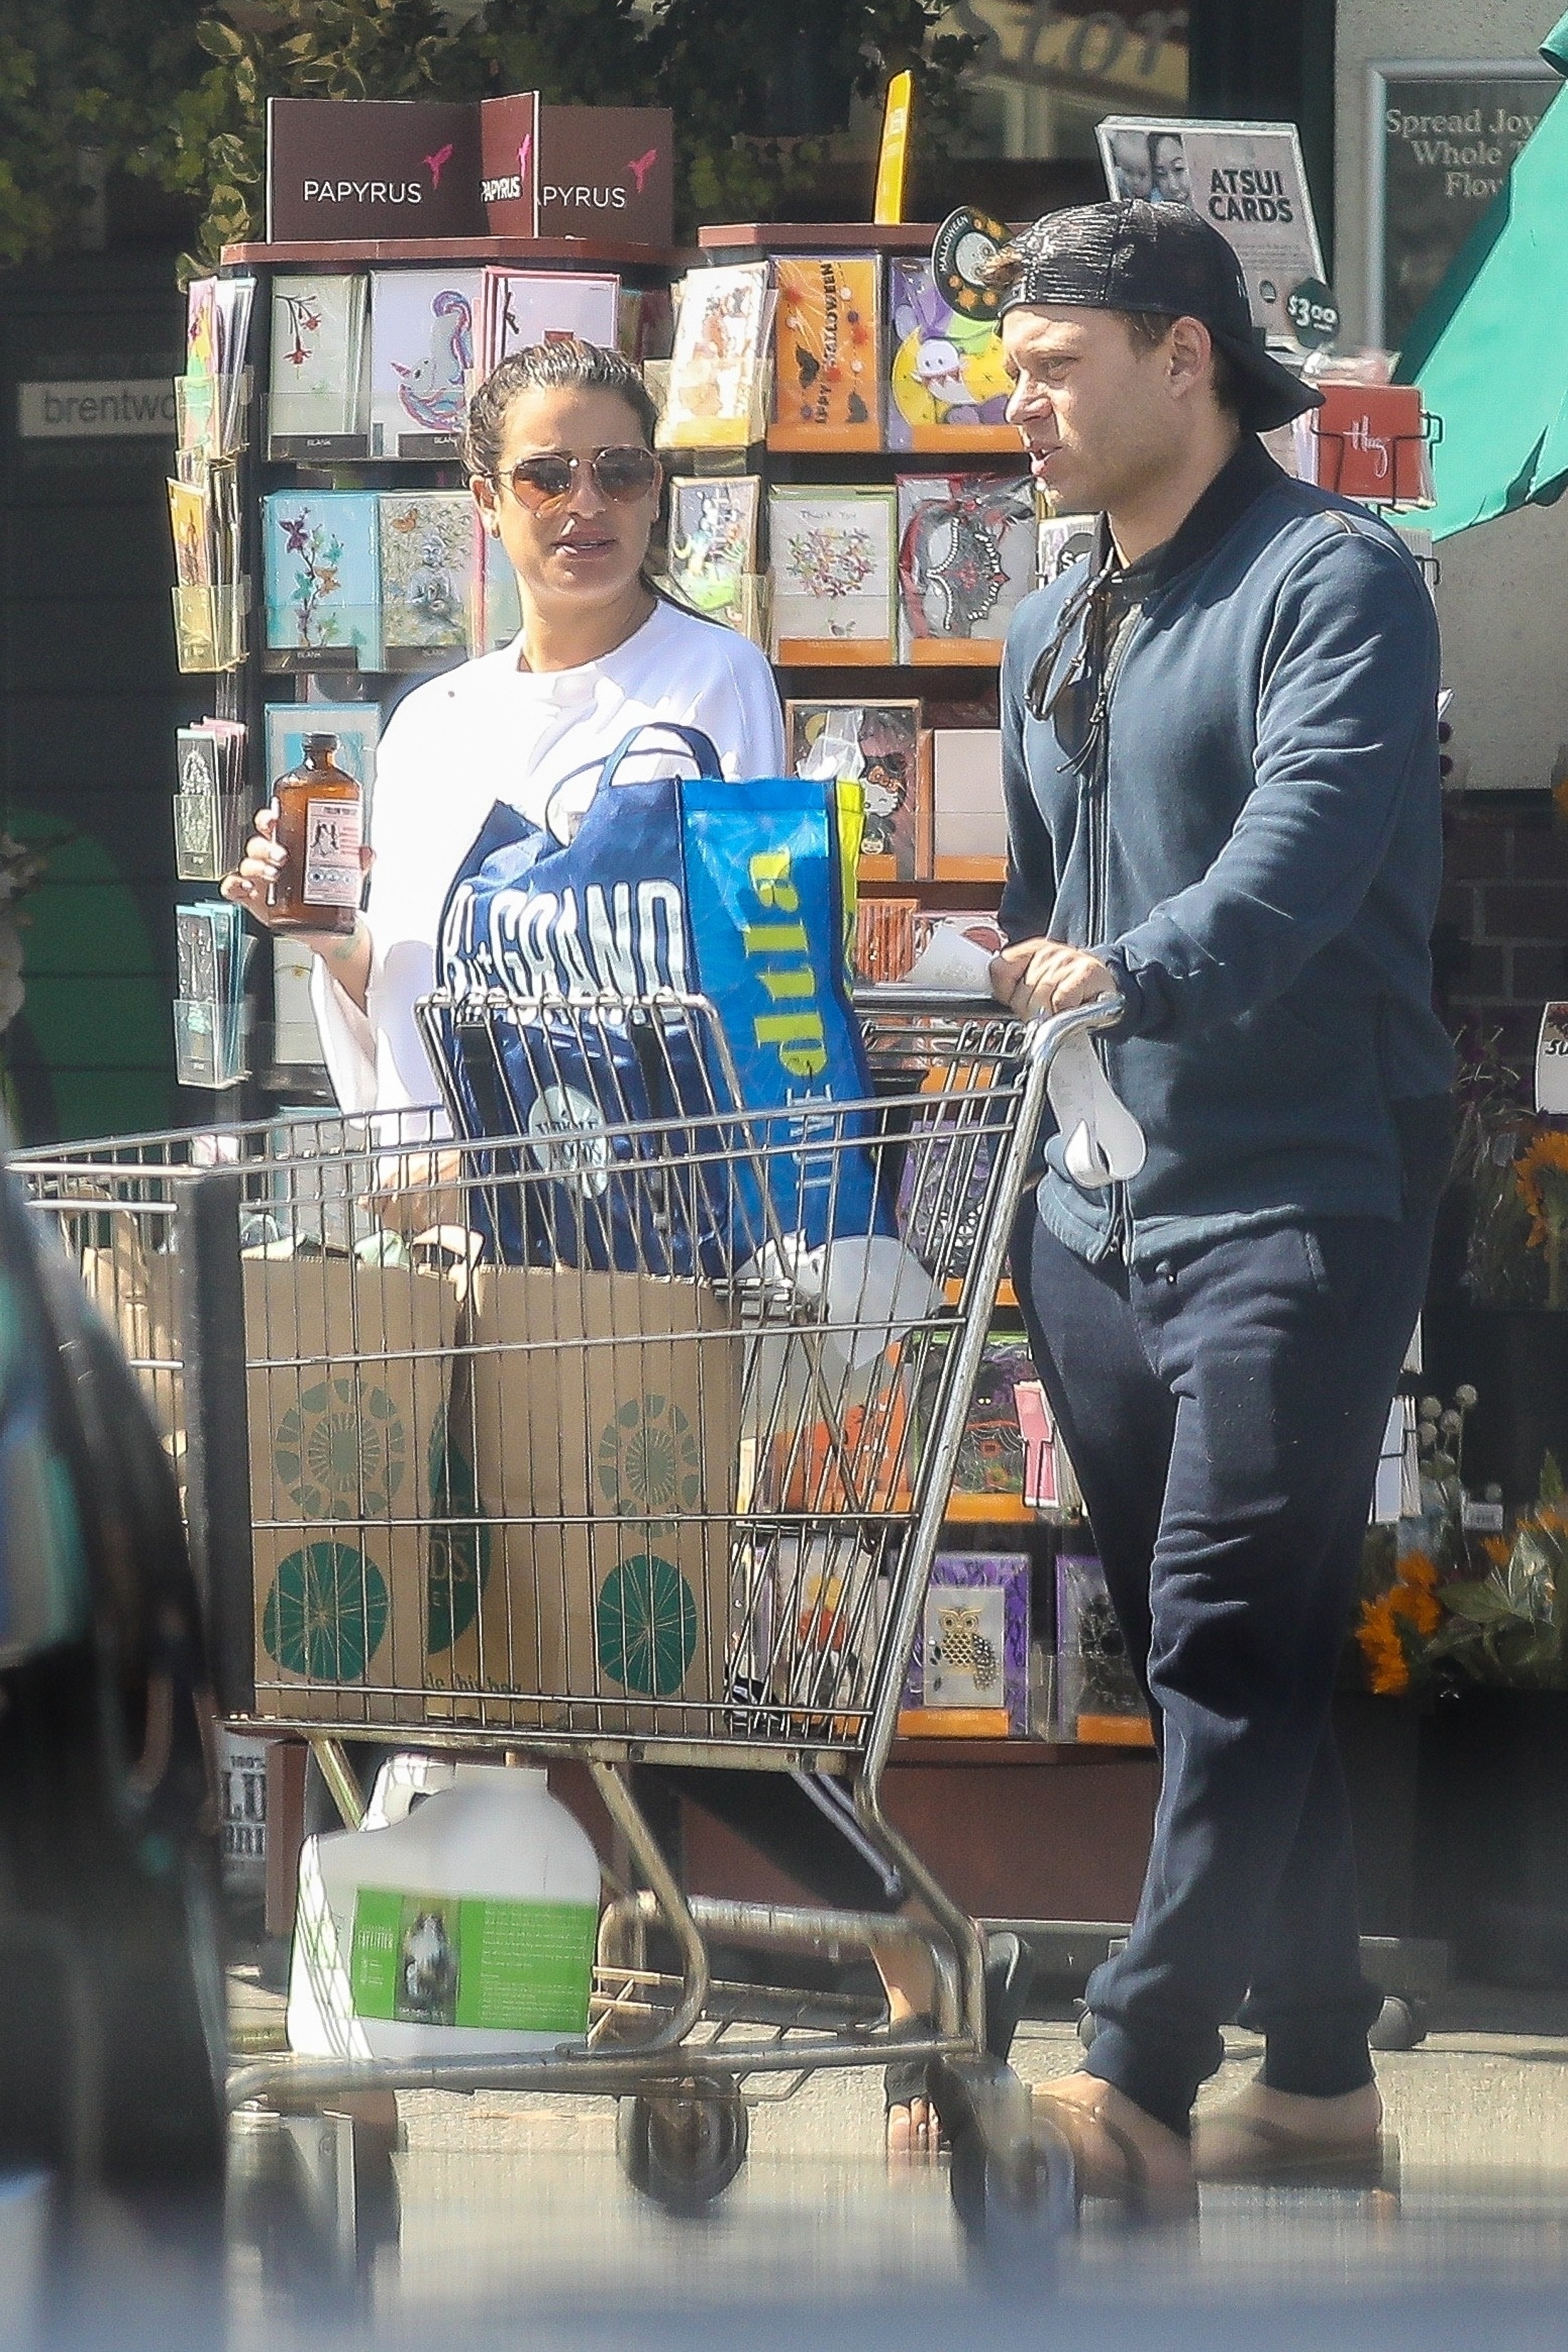 lea-michele-at-whole-foods-with-z-10072018-6.jpg